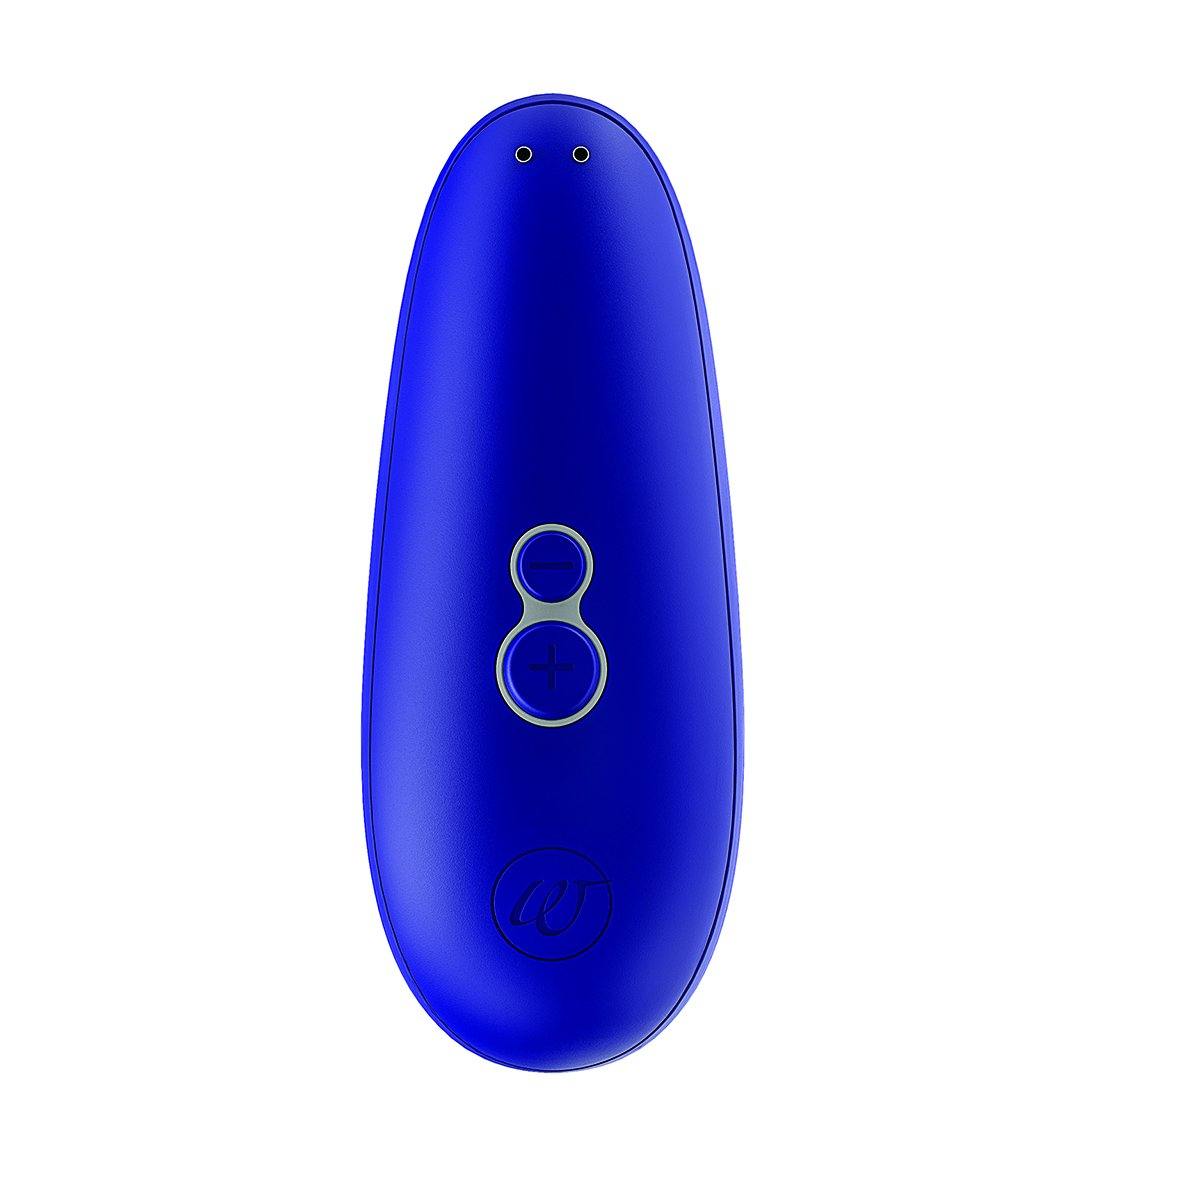 Womanizer Starlet 2 - Buy At Luxury Toy X - Free 3-Day Shipping